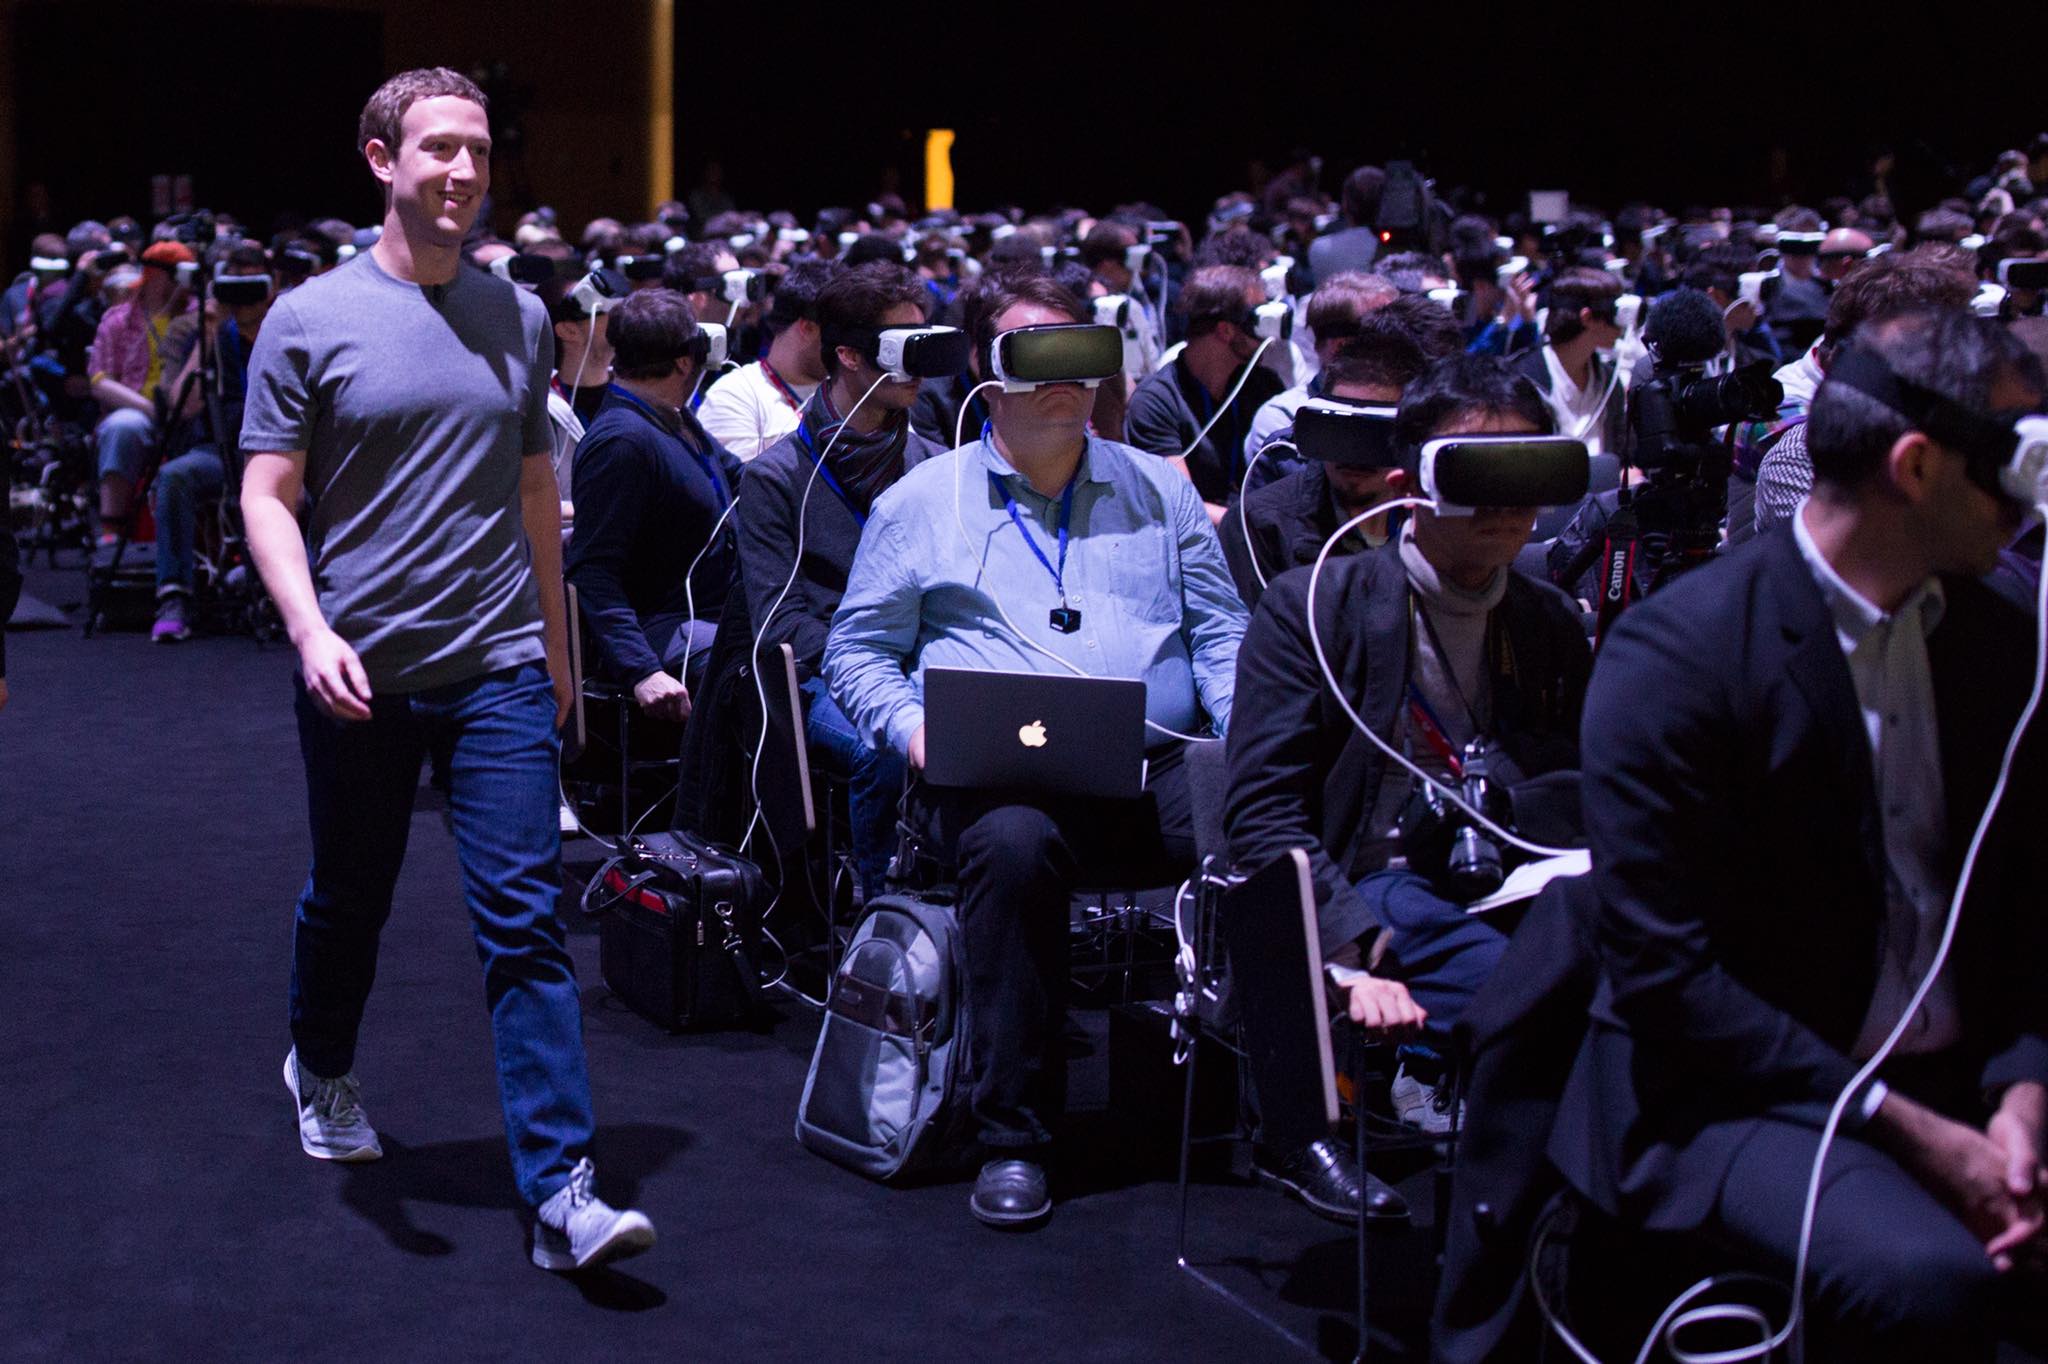 10 Years Ago Zuckerberg Bought Oculus to Outmaneuver Apple, Will He Succeed?